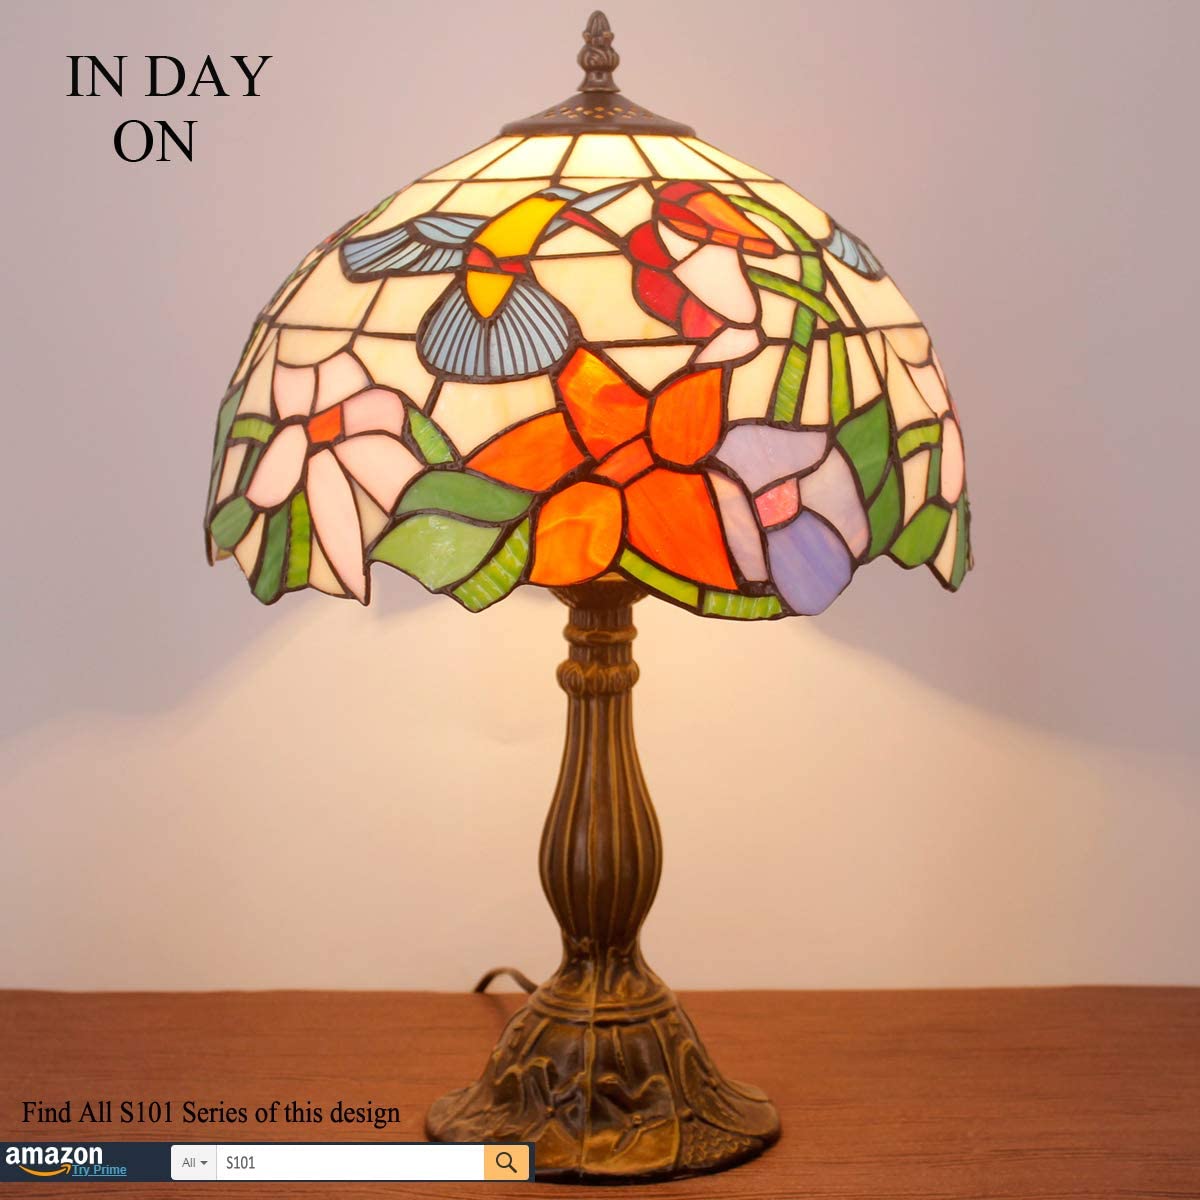  Lamp Stained Glass Lamp Hummingbird Style Bedside Table Lamp Desk Reading Light 12X12X18 Inches Decor Bedroom Living Room Home Office S101 Series